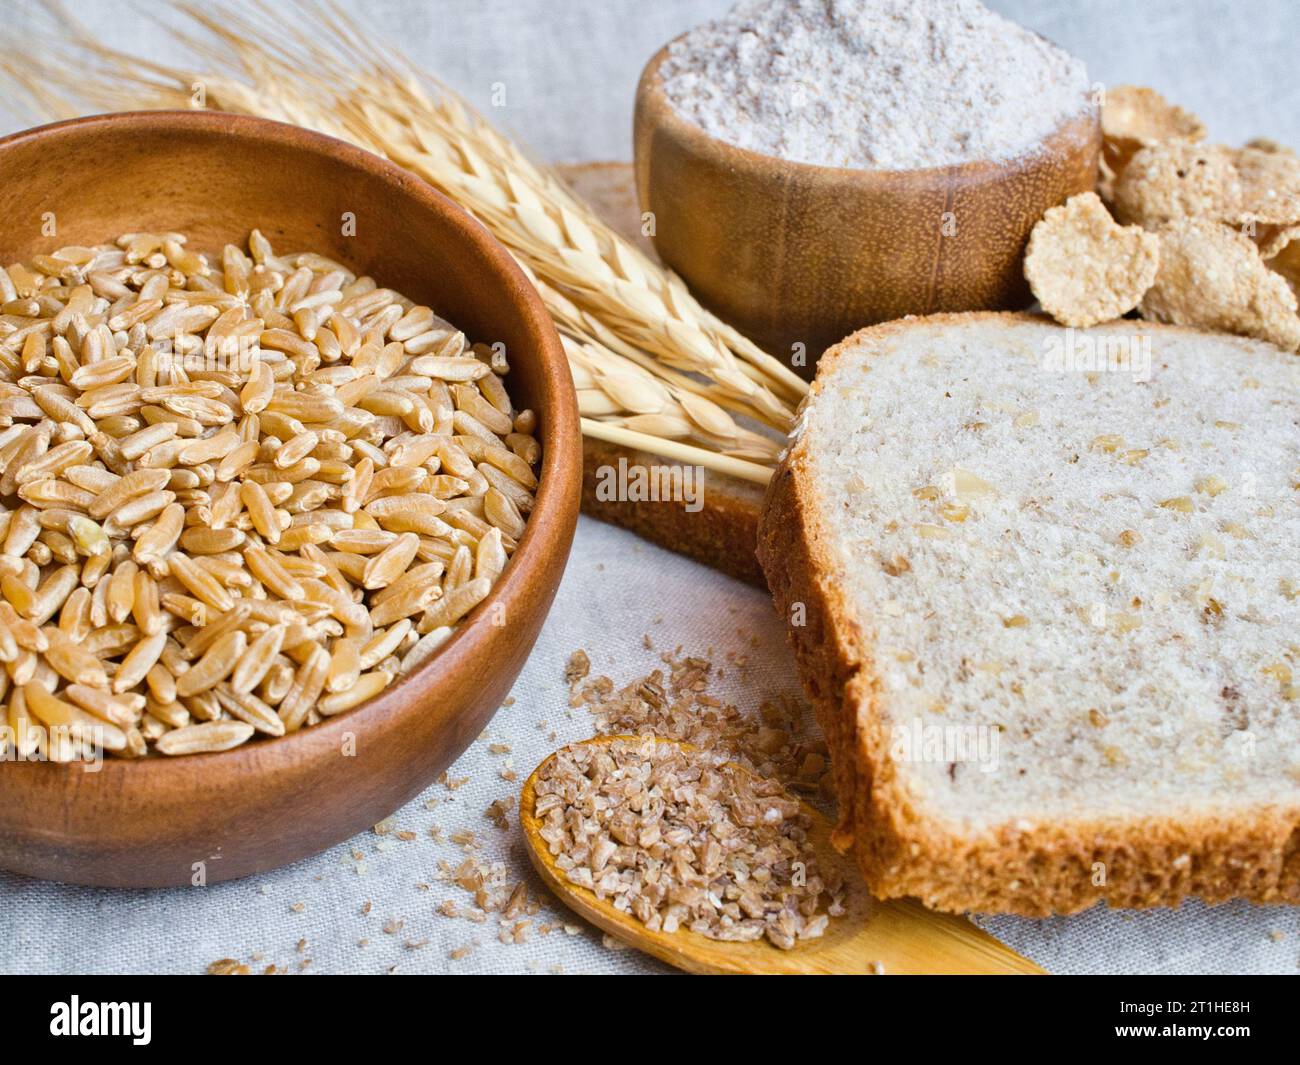 Whole wheat image of cereal grain crops from American harvest for heart healthy diet. Variety of wheat products shown. Stock Photo